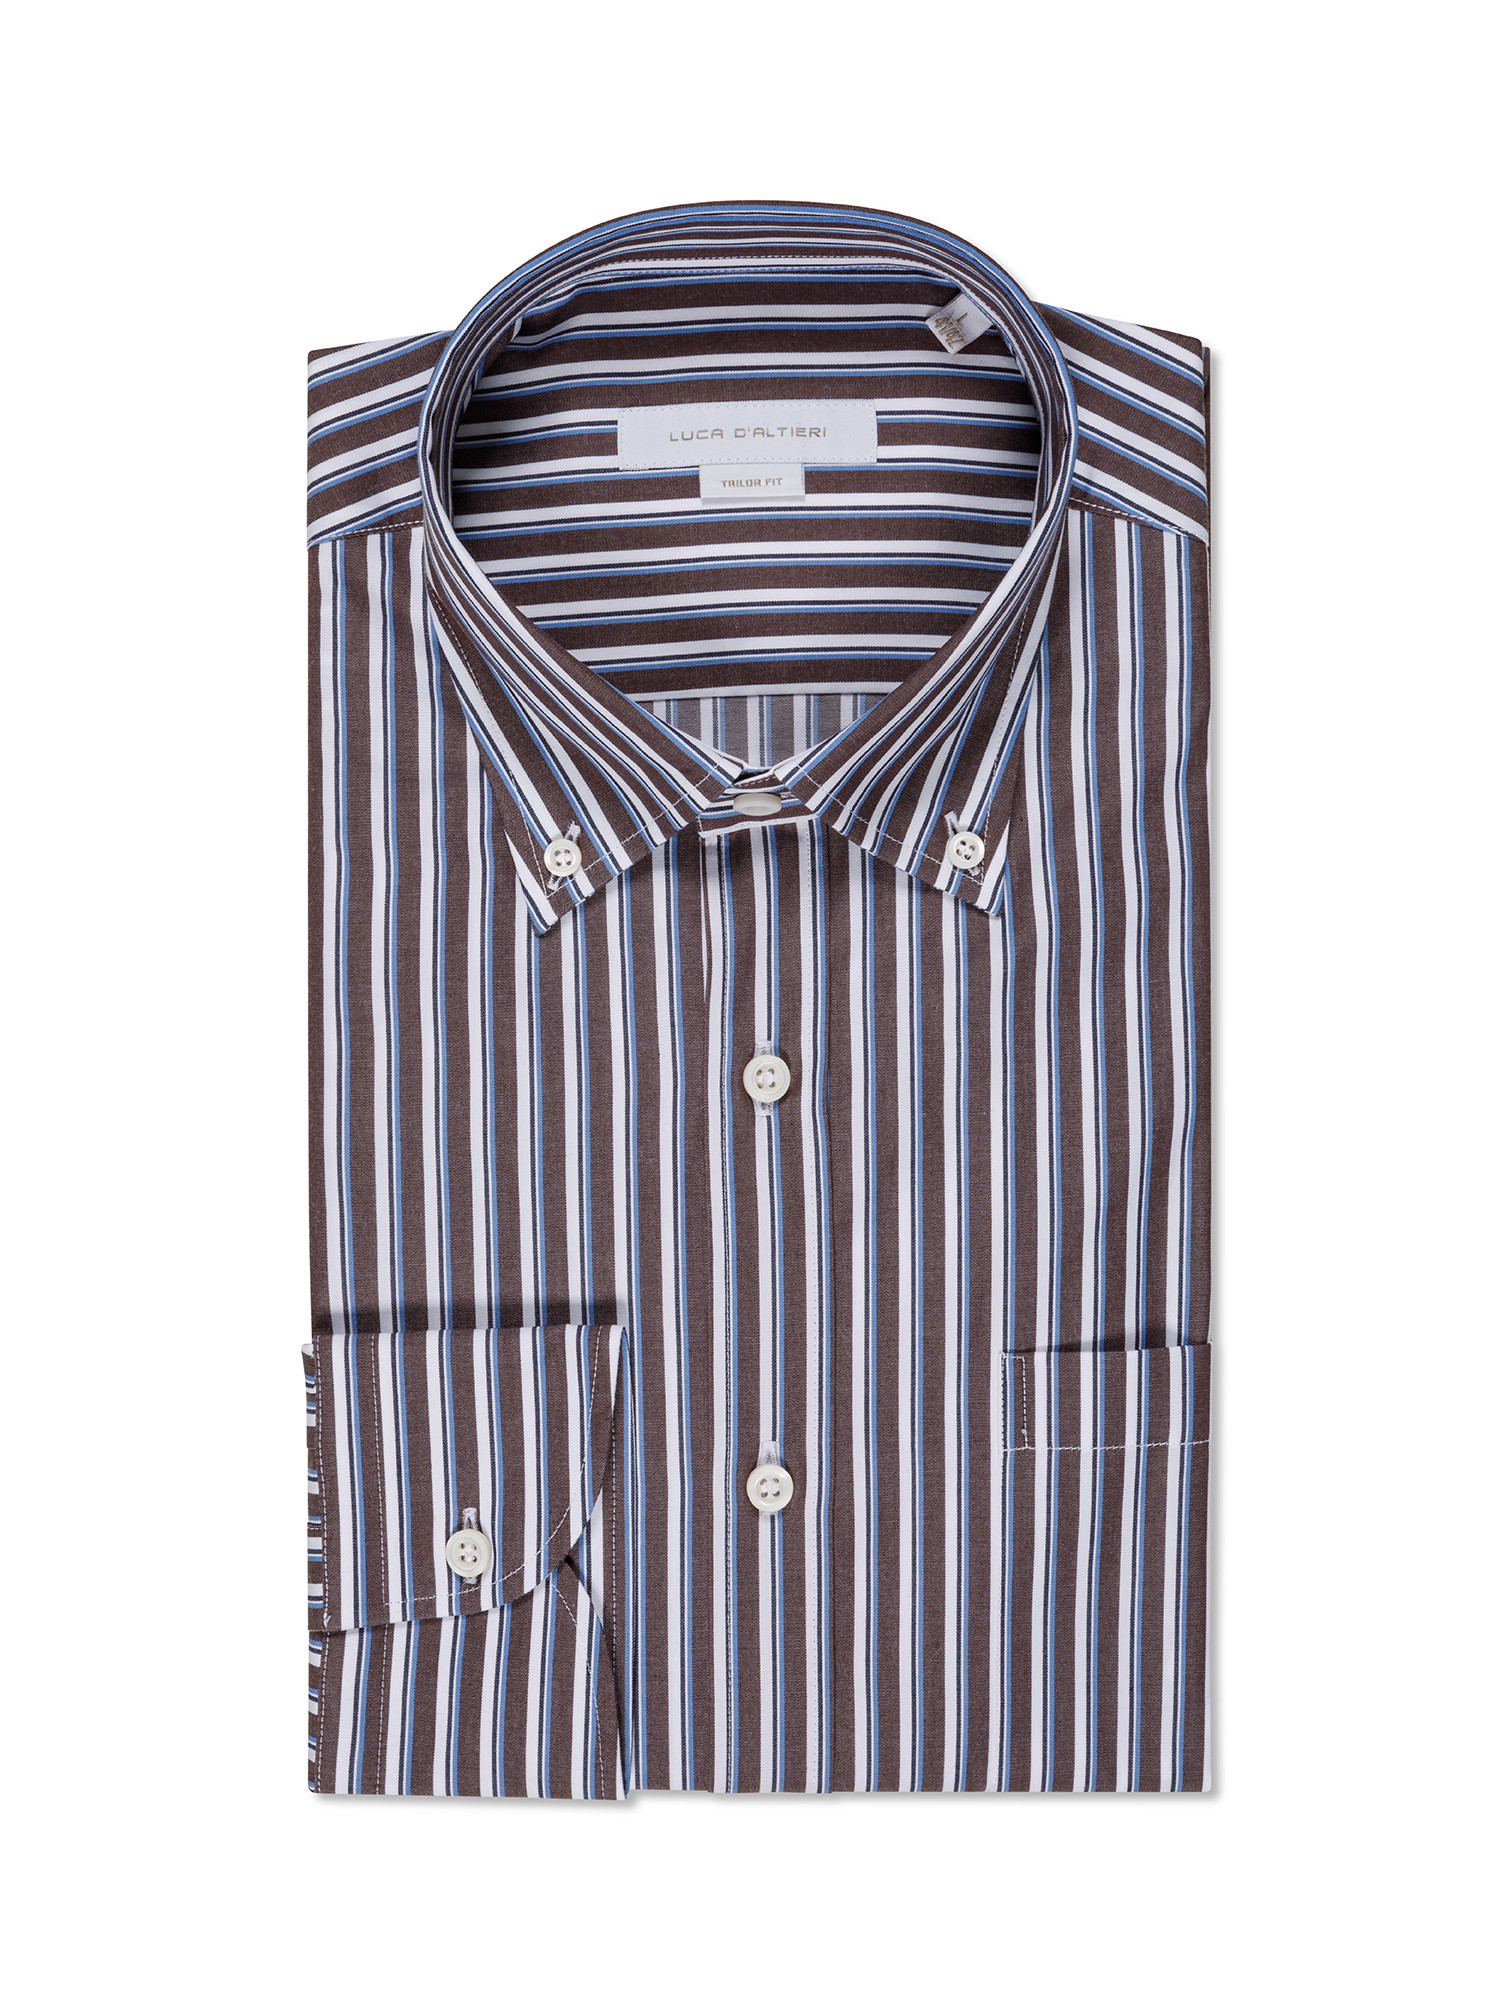 Luca D'Altieri - Camicia a righe tailor fit in puro cotone, Marrone, large image number 0